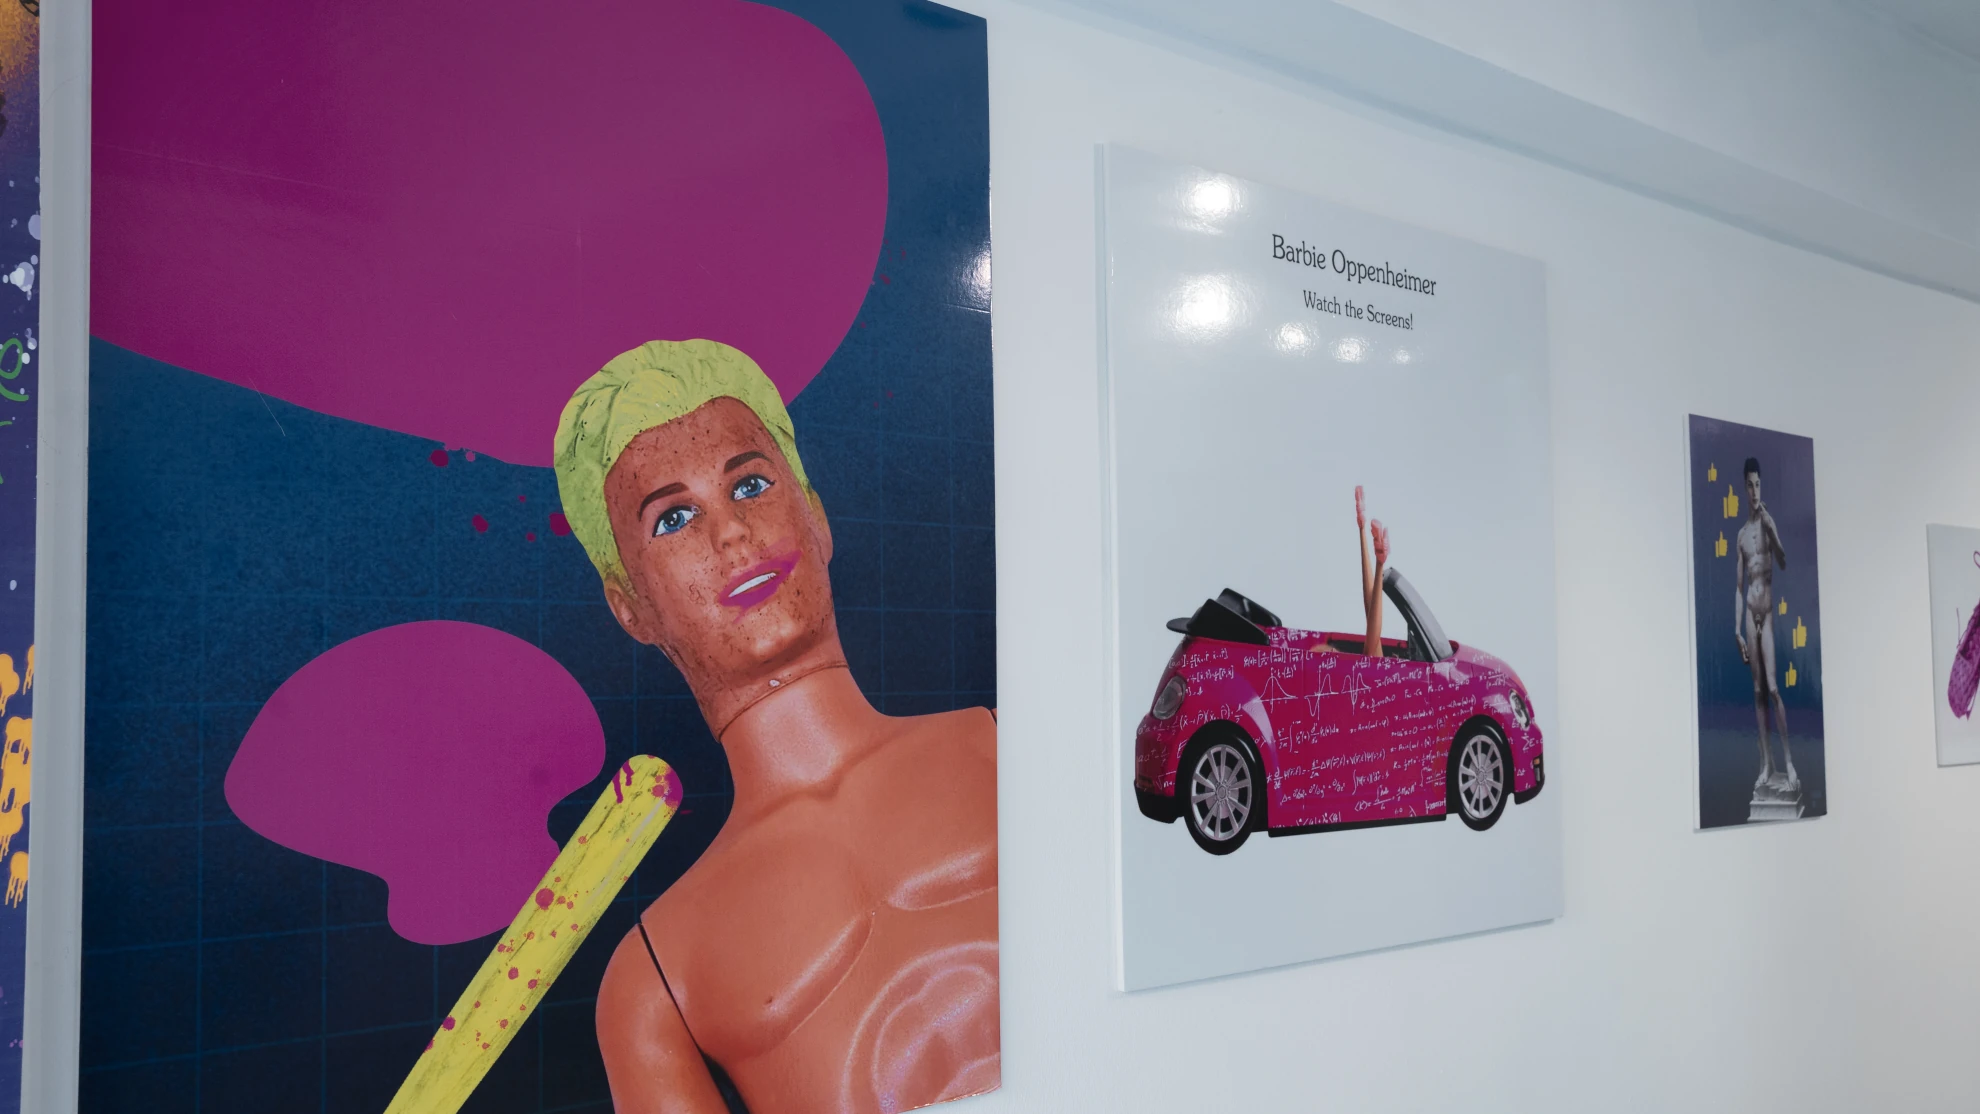 Art items. Exhibition in September of 2023 from contemporary artists Vladimir Tsesler & Masha Bo. Theme of exhibition is a "Barbie world" versus "Ken universe".